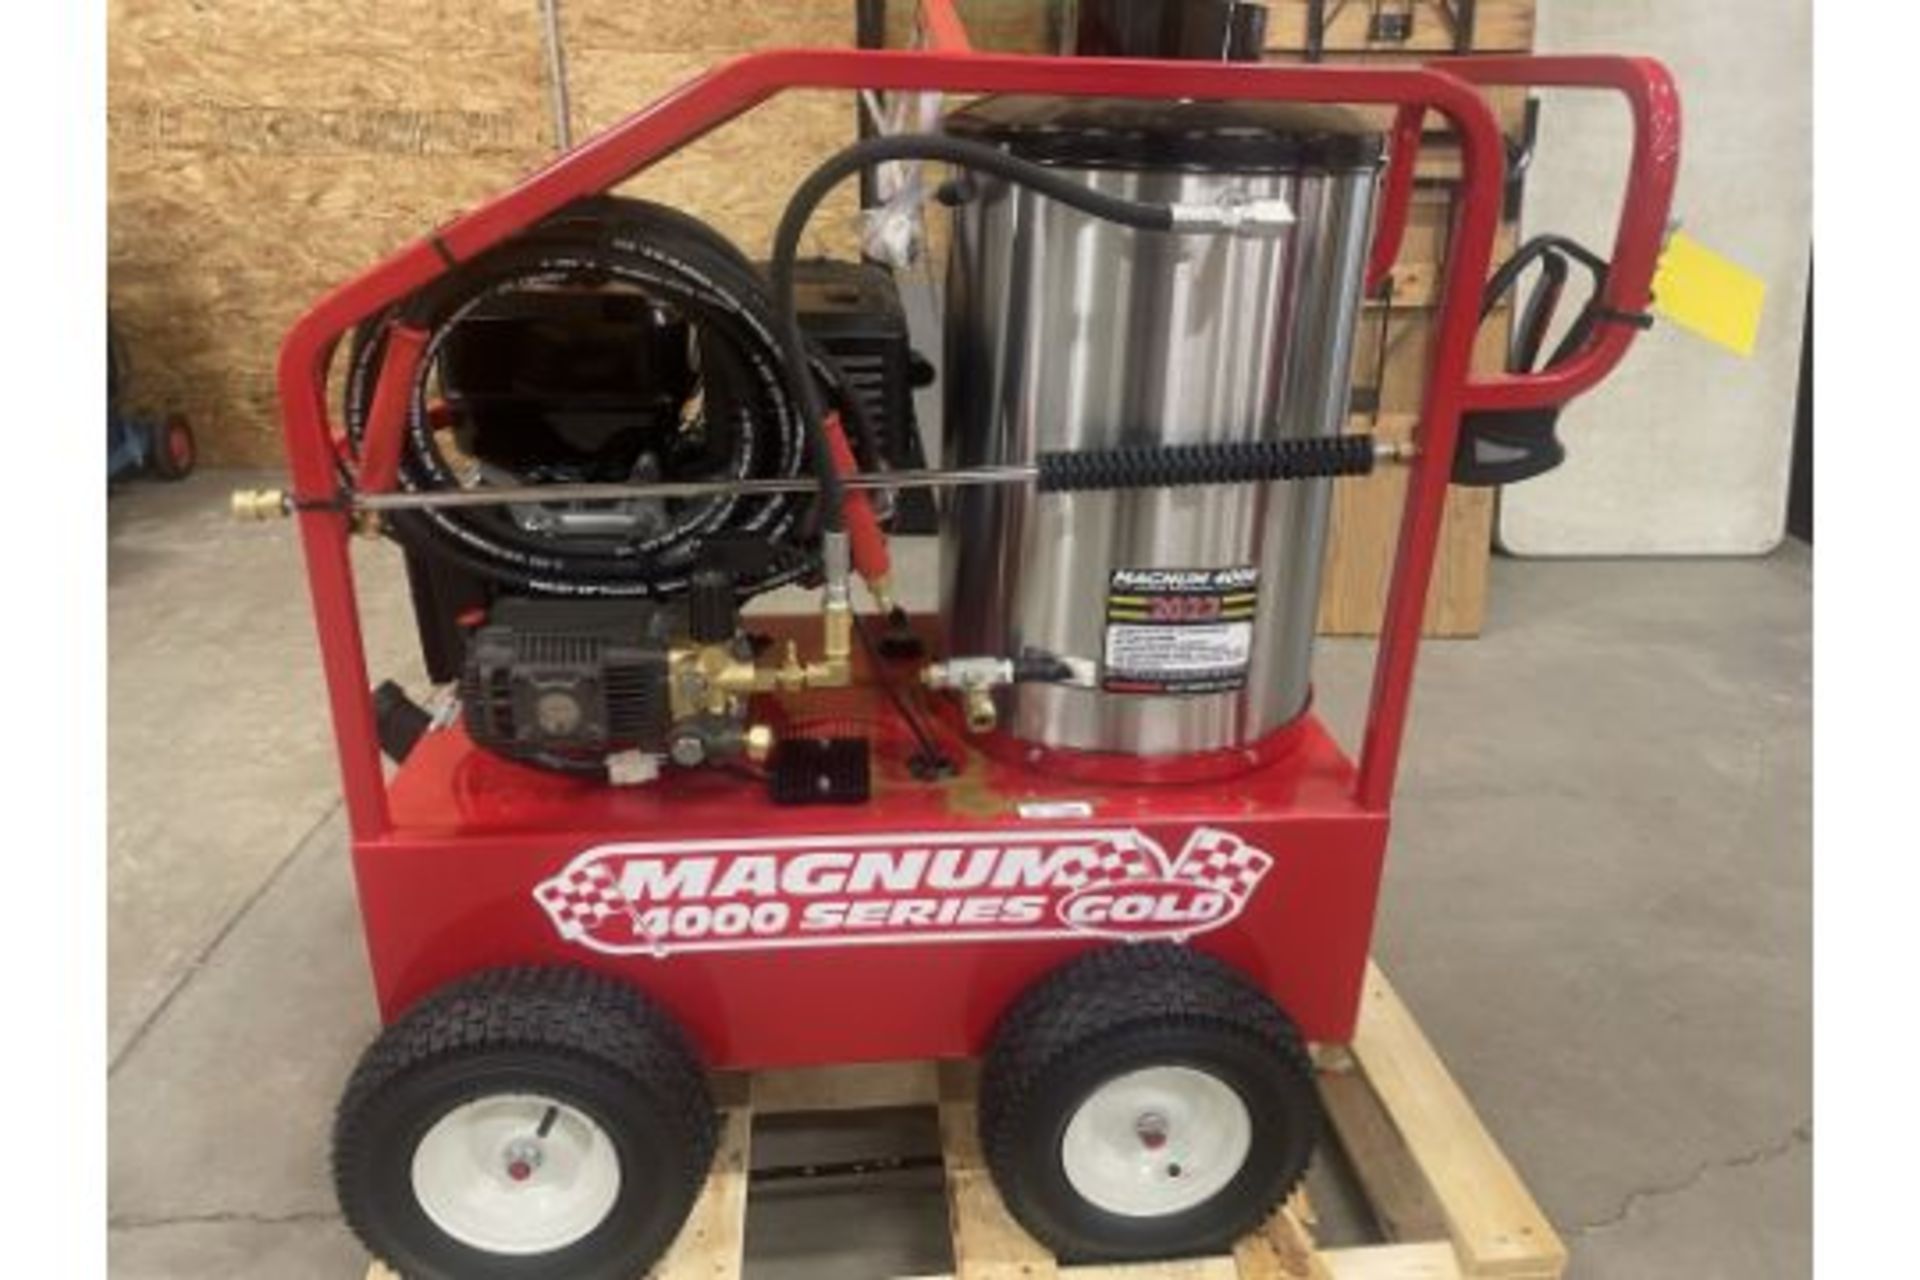 EASY KLEEN MAGNUM 4000 HOT WATER PRESSURE WASHER, - NOTE "NO OIL IN ENGINE OR PUMP" - Image 7 of 9